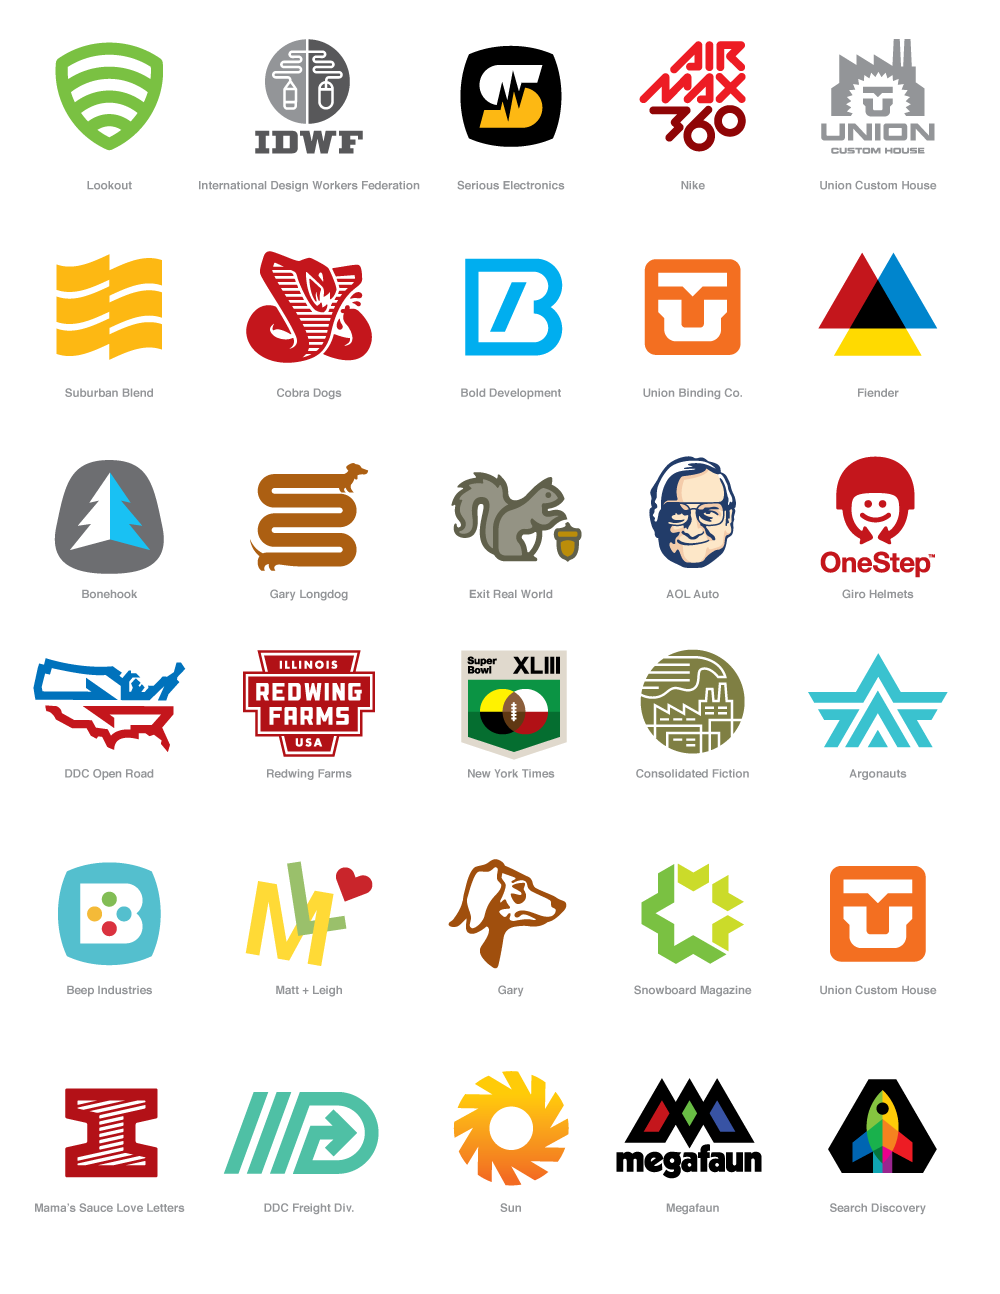 Meet Aaron James Draplin. Thick line maker at DDC and creator of Field ...